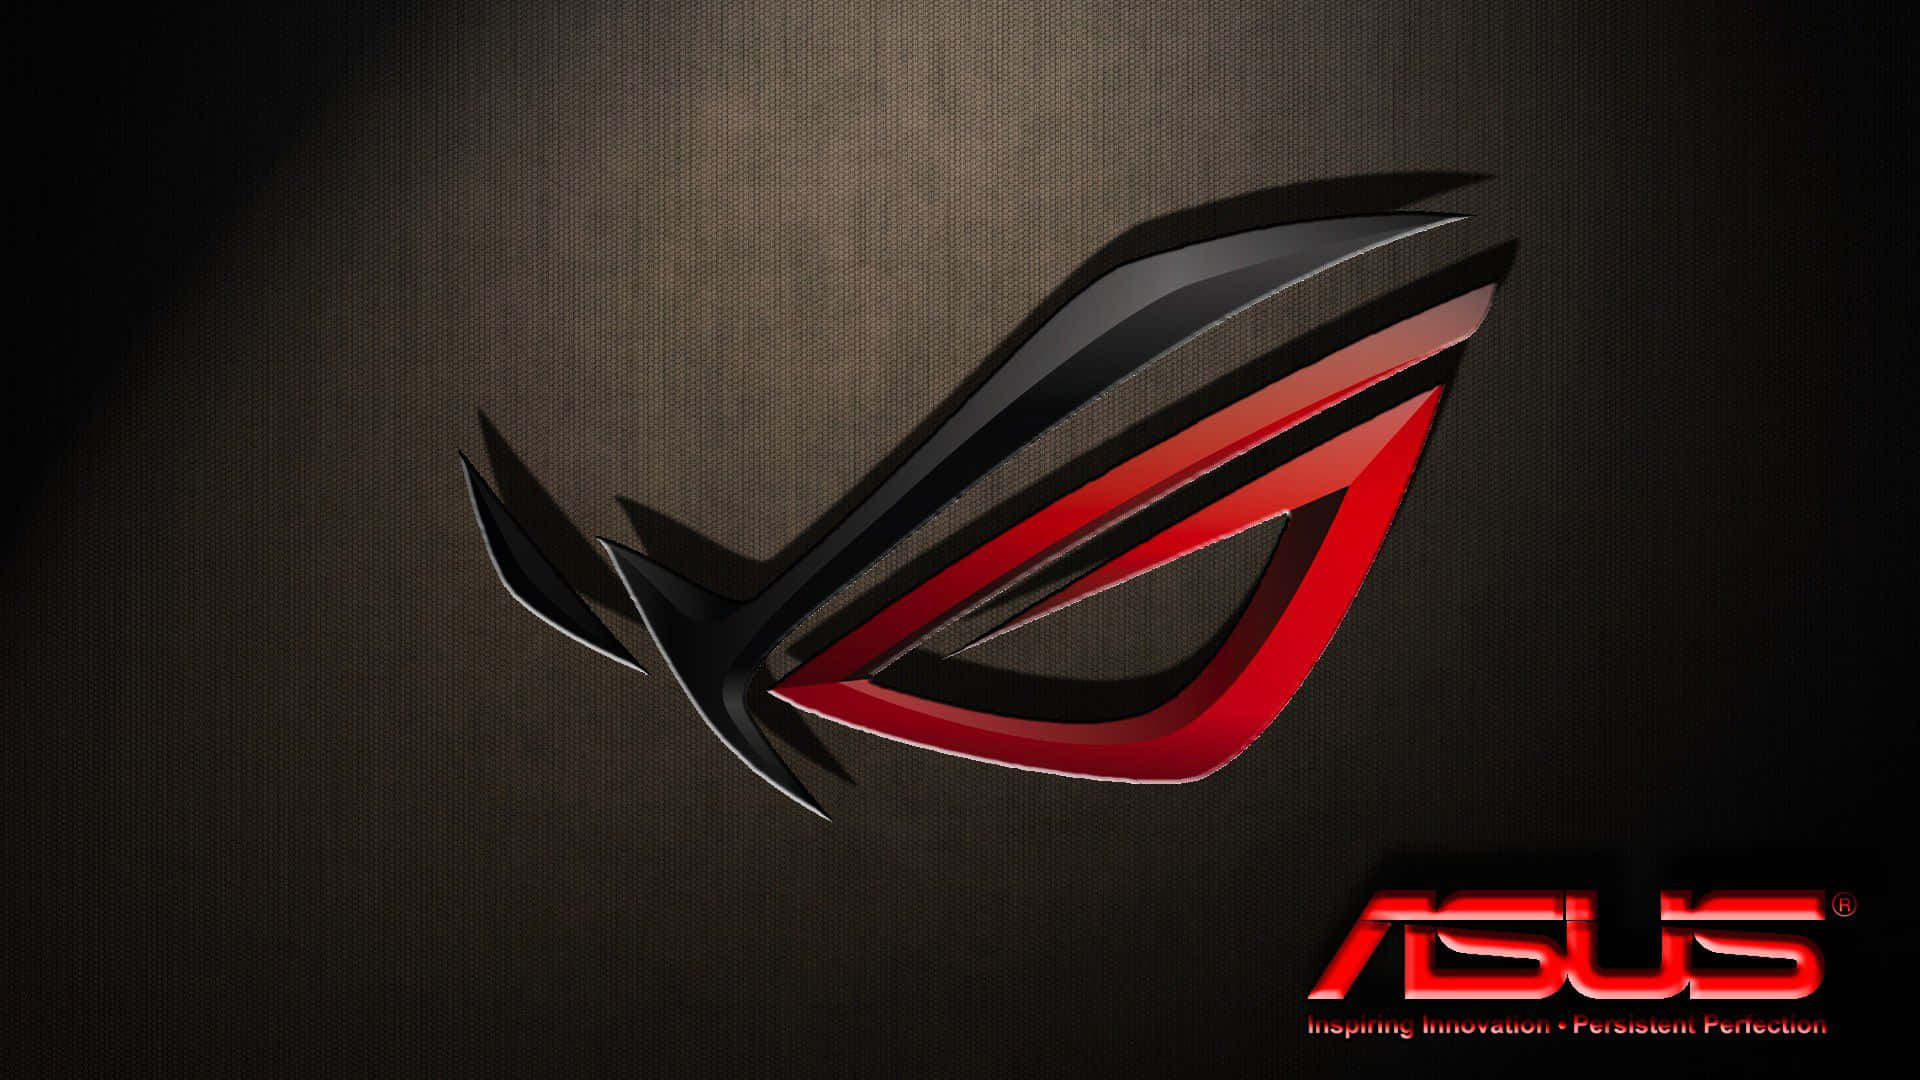 Improve your productivity with ASUS